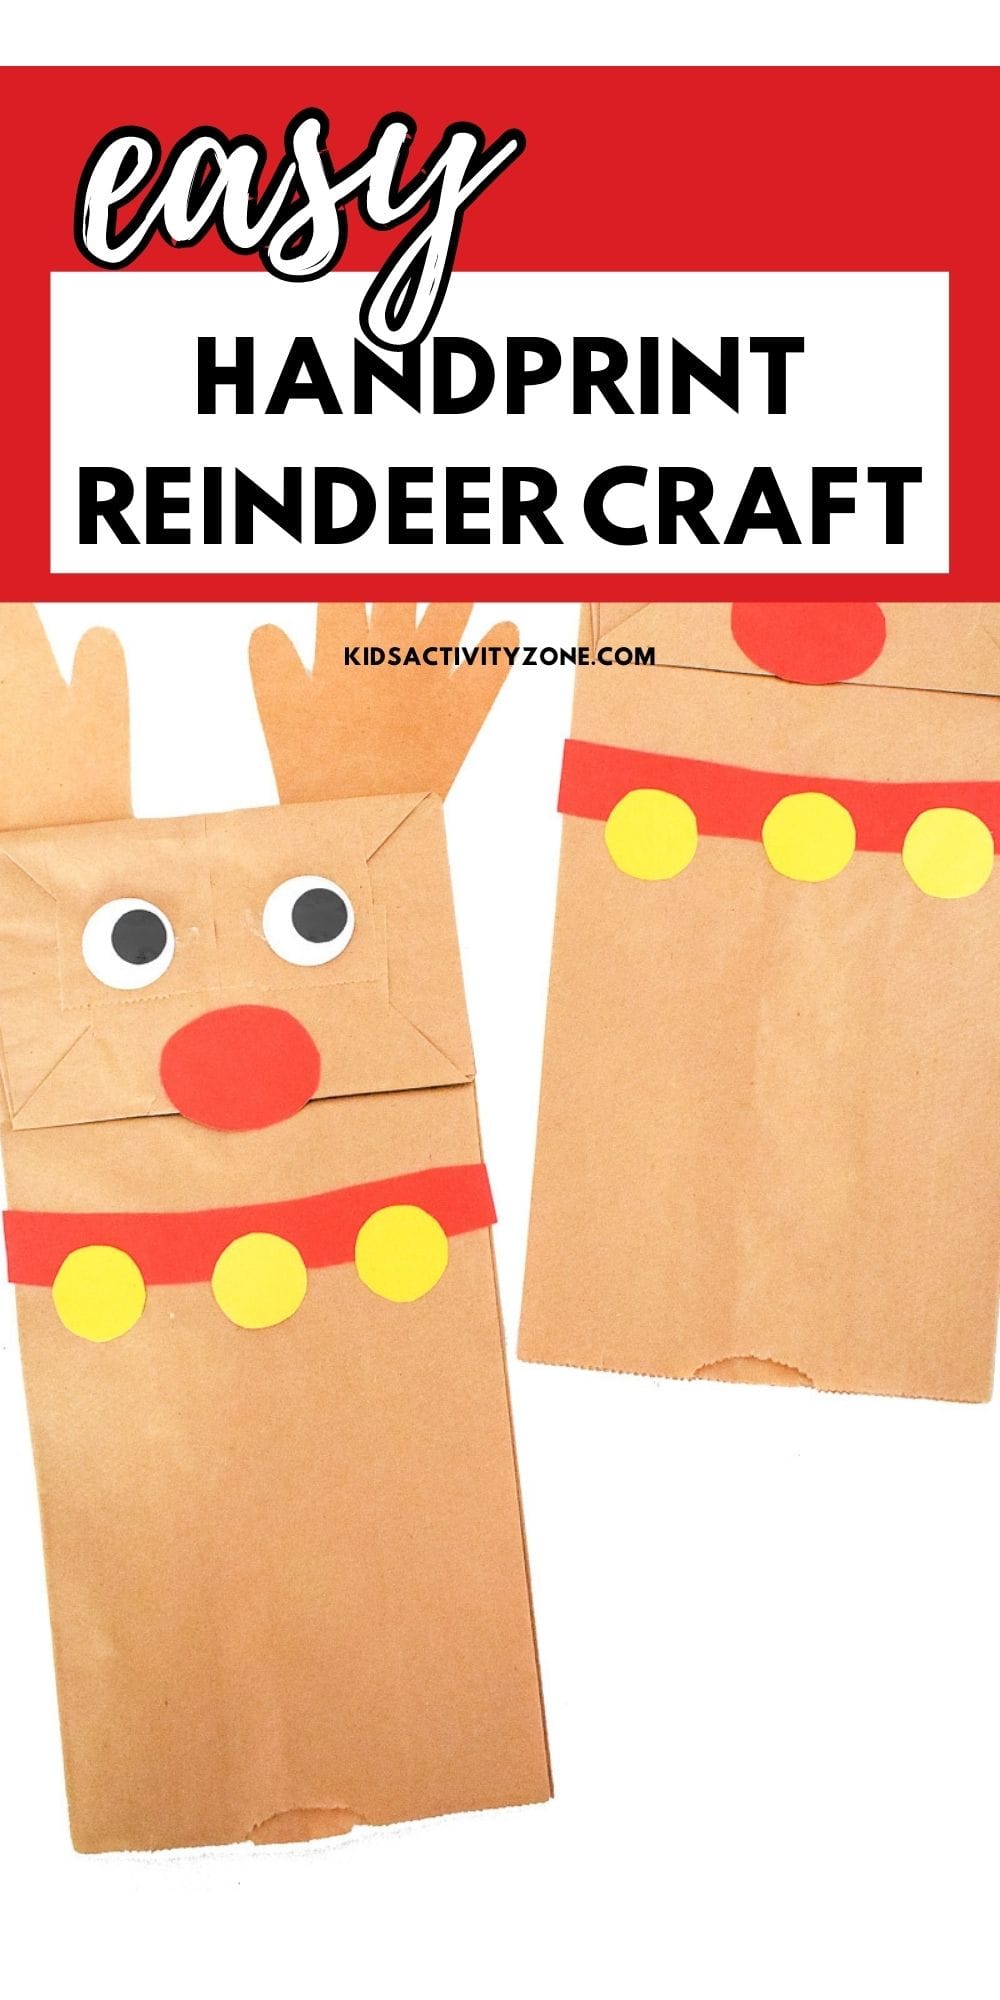 If your kids love Rudolph the Red-Nosed Reindeer they will love making this easy Paper Bag Handprint Reindeer Craft. Supplies that you already have in your home make this an easy at home craft. Or a great holiday party activity for at school!